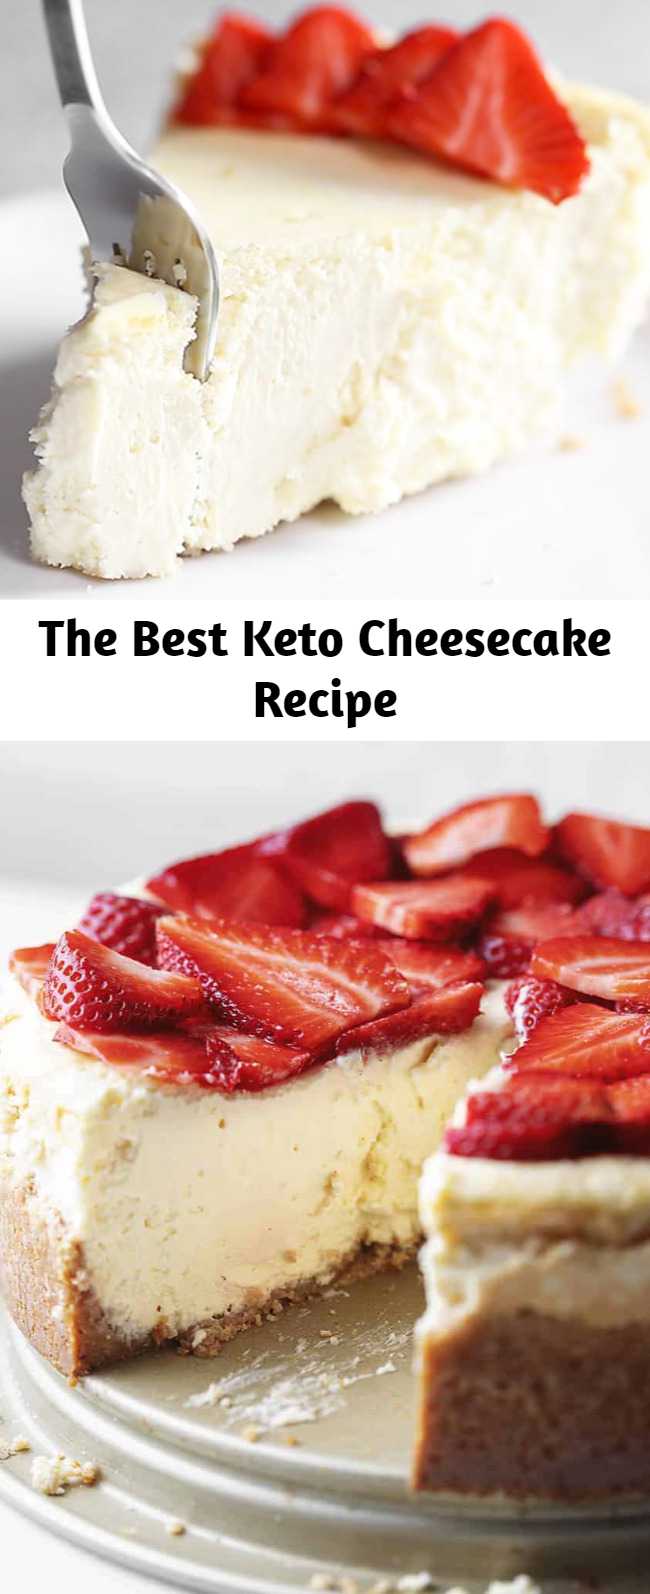 The Best Keto Cheesecake Recipe - This really is the best low carb and keto cheesecake. Even my non-keto family proclaimed “This is the best cheesecake I have ever had!”